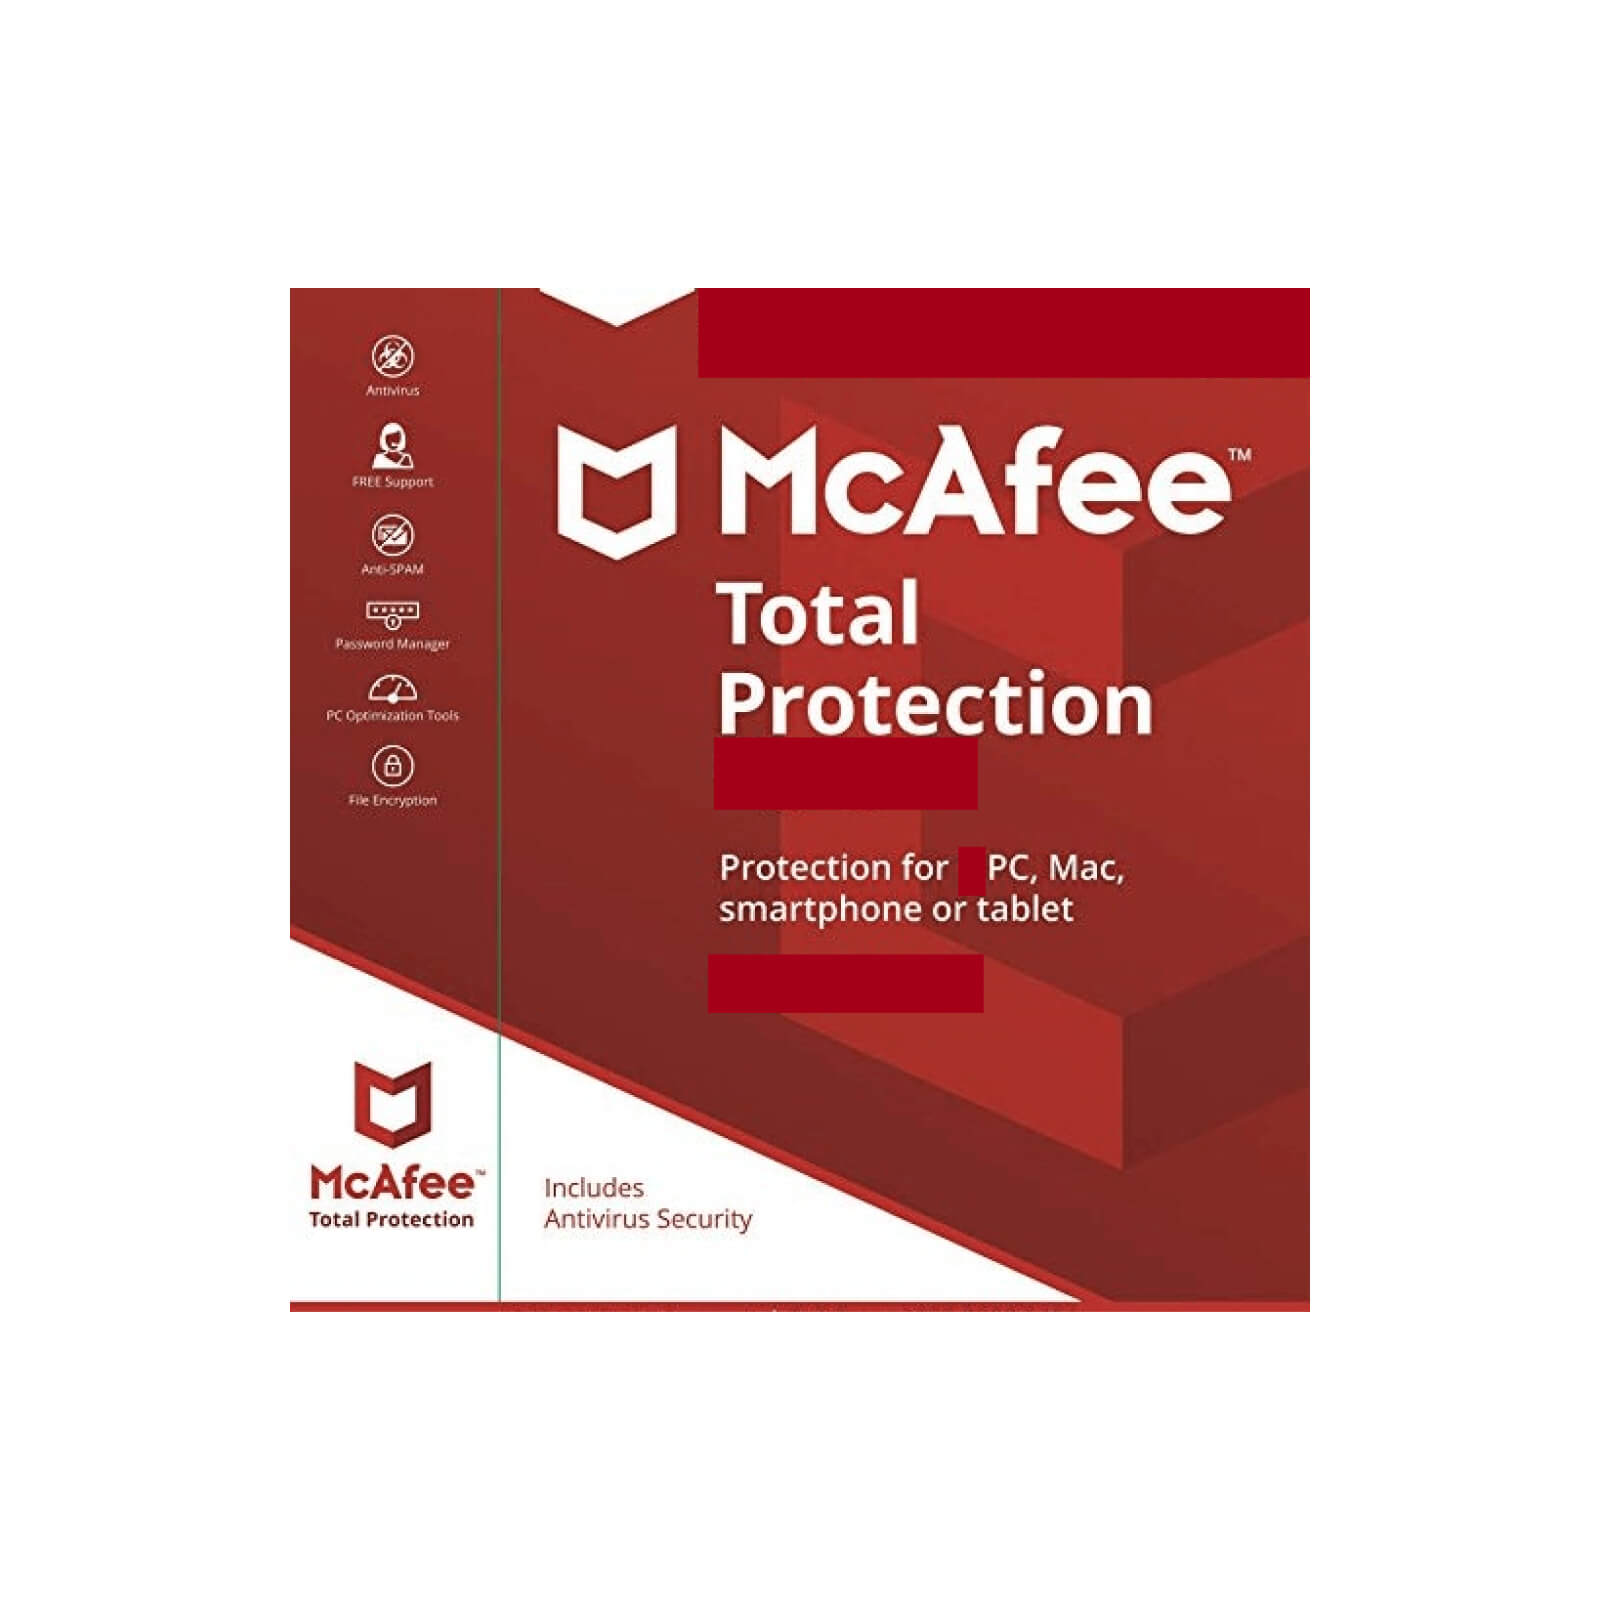 mcafee total protection deals